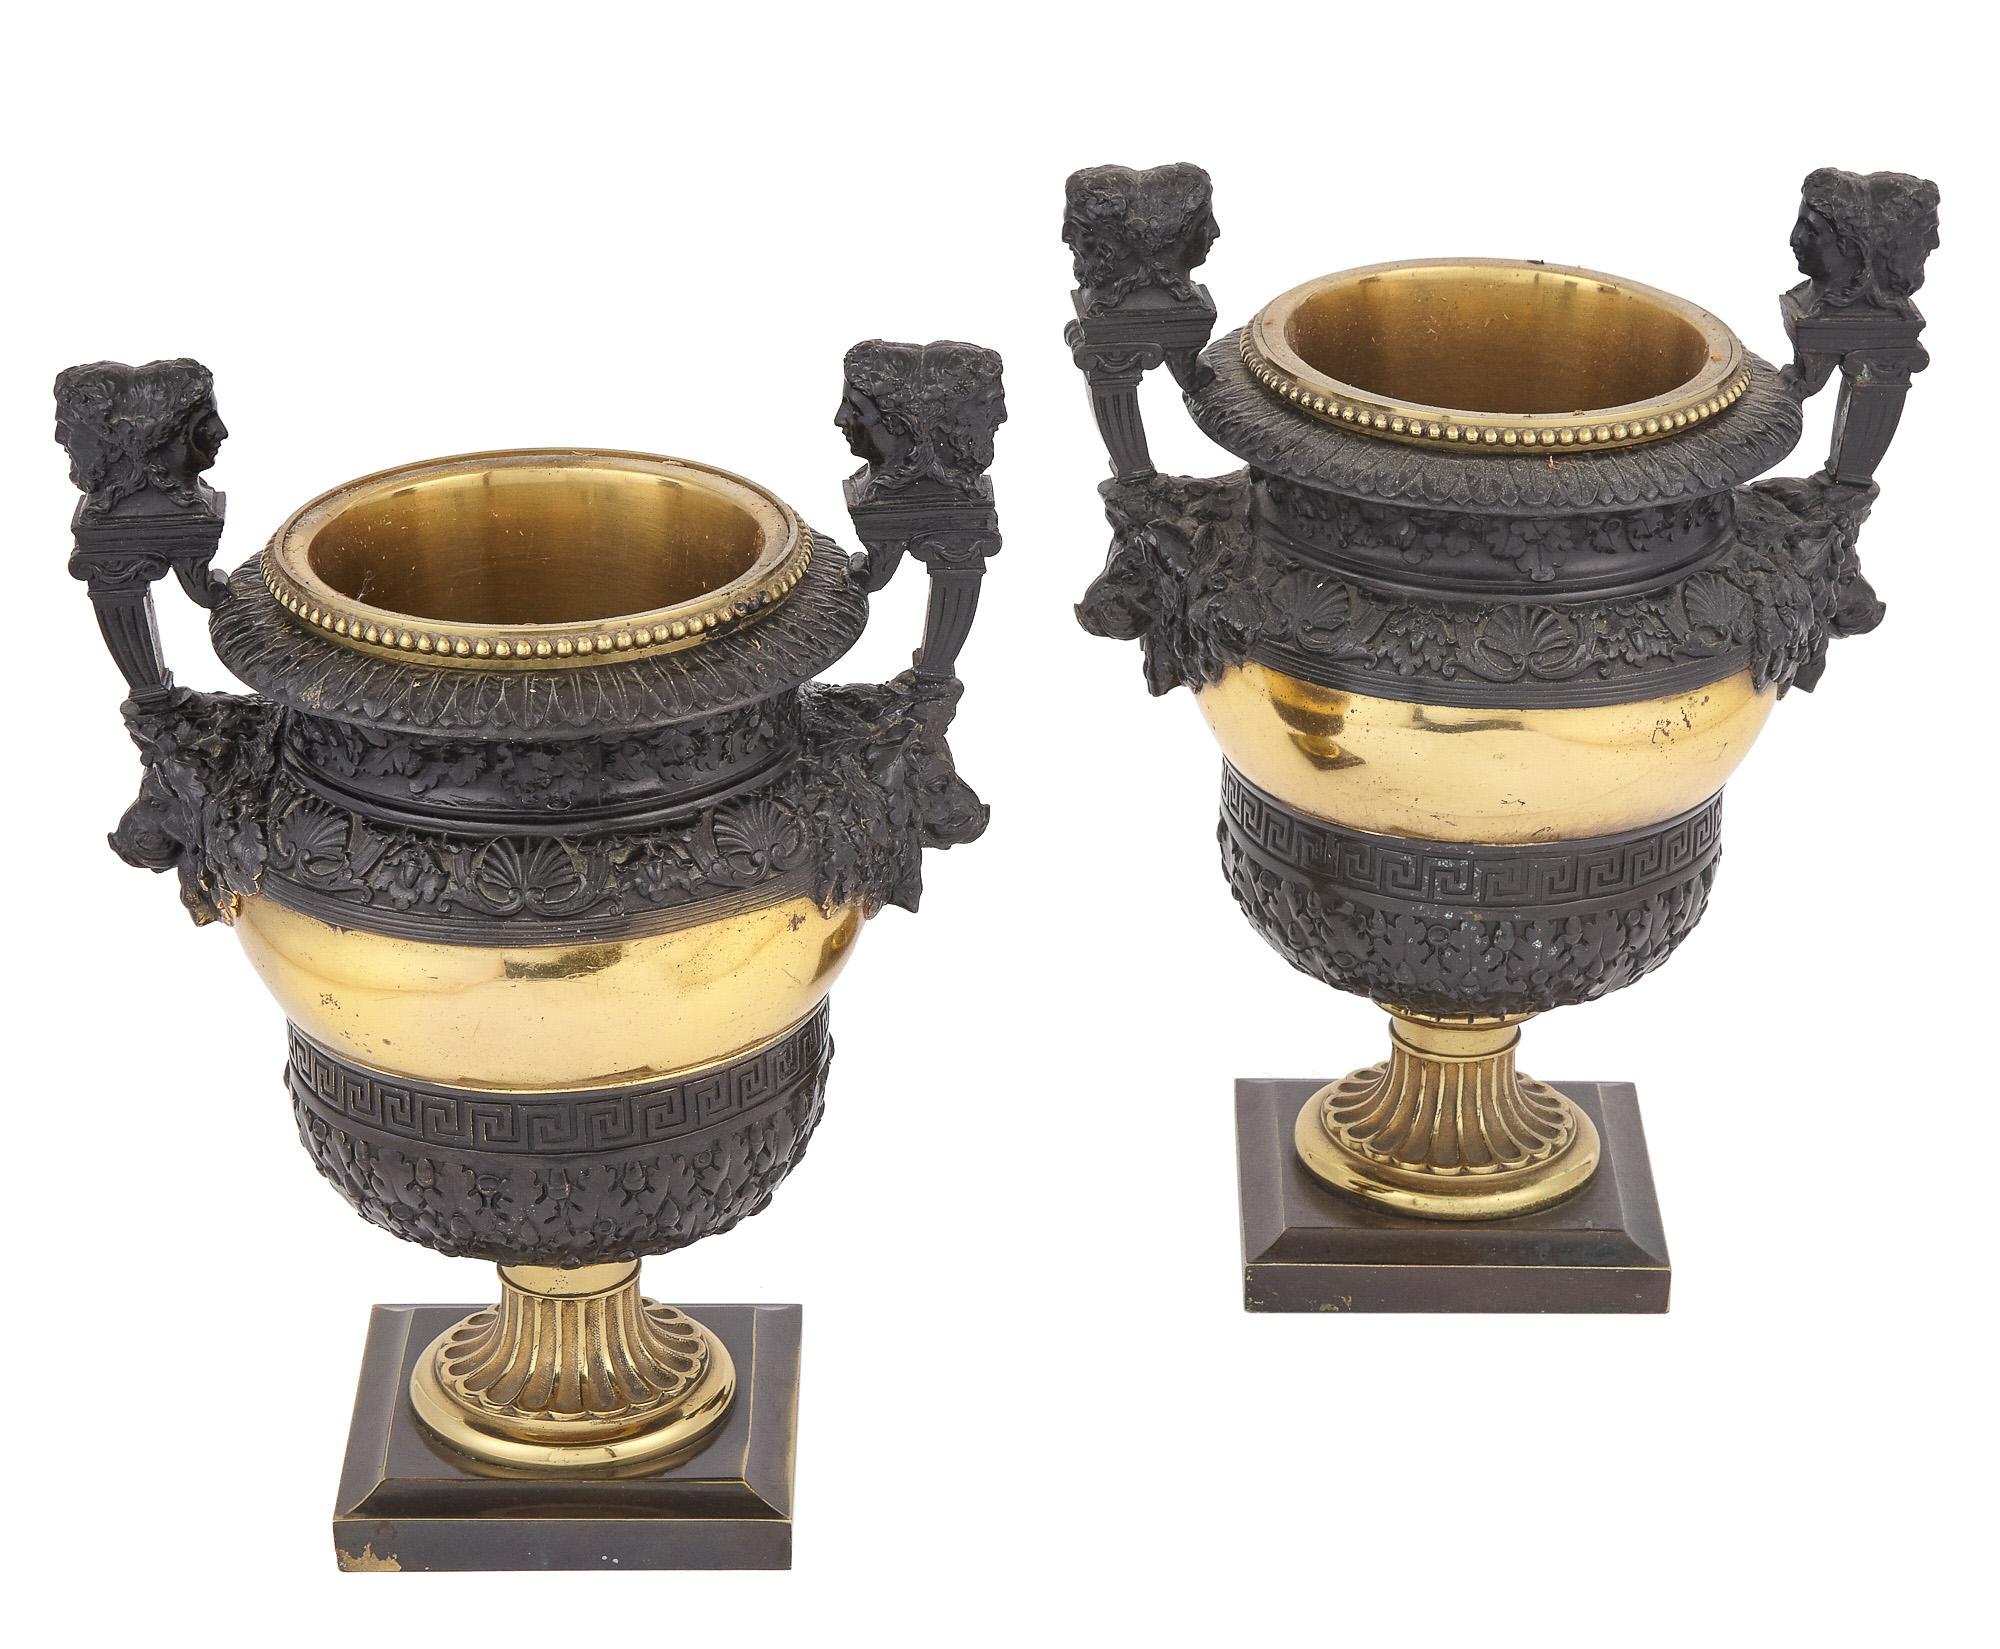 Pair of Napoleon III gilt and patinated bronze anus urns by Leopold Oudry & Cie, with preserved boxwood topiaries.
Urns 11 in tall and 8 in wide. Urns with topiaries 20.5 in tall.
 